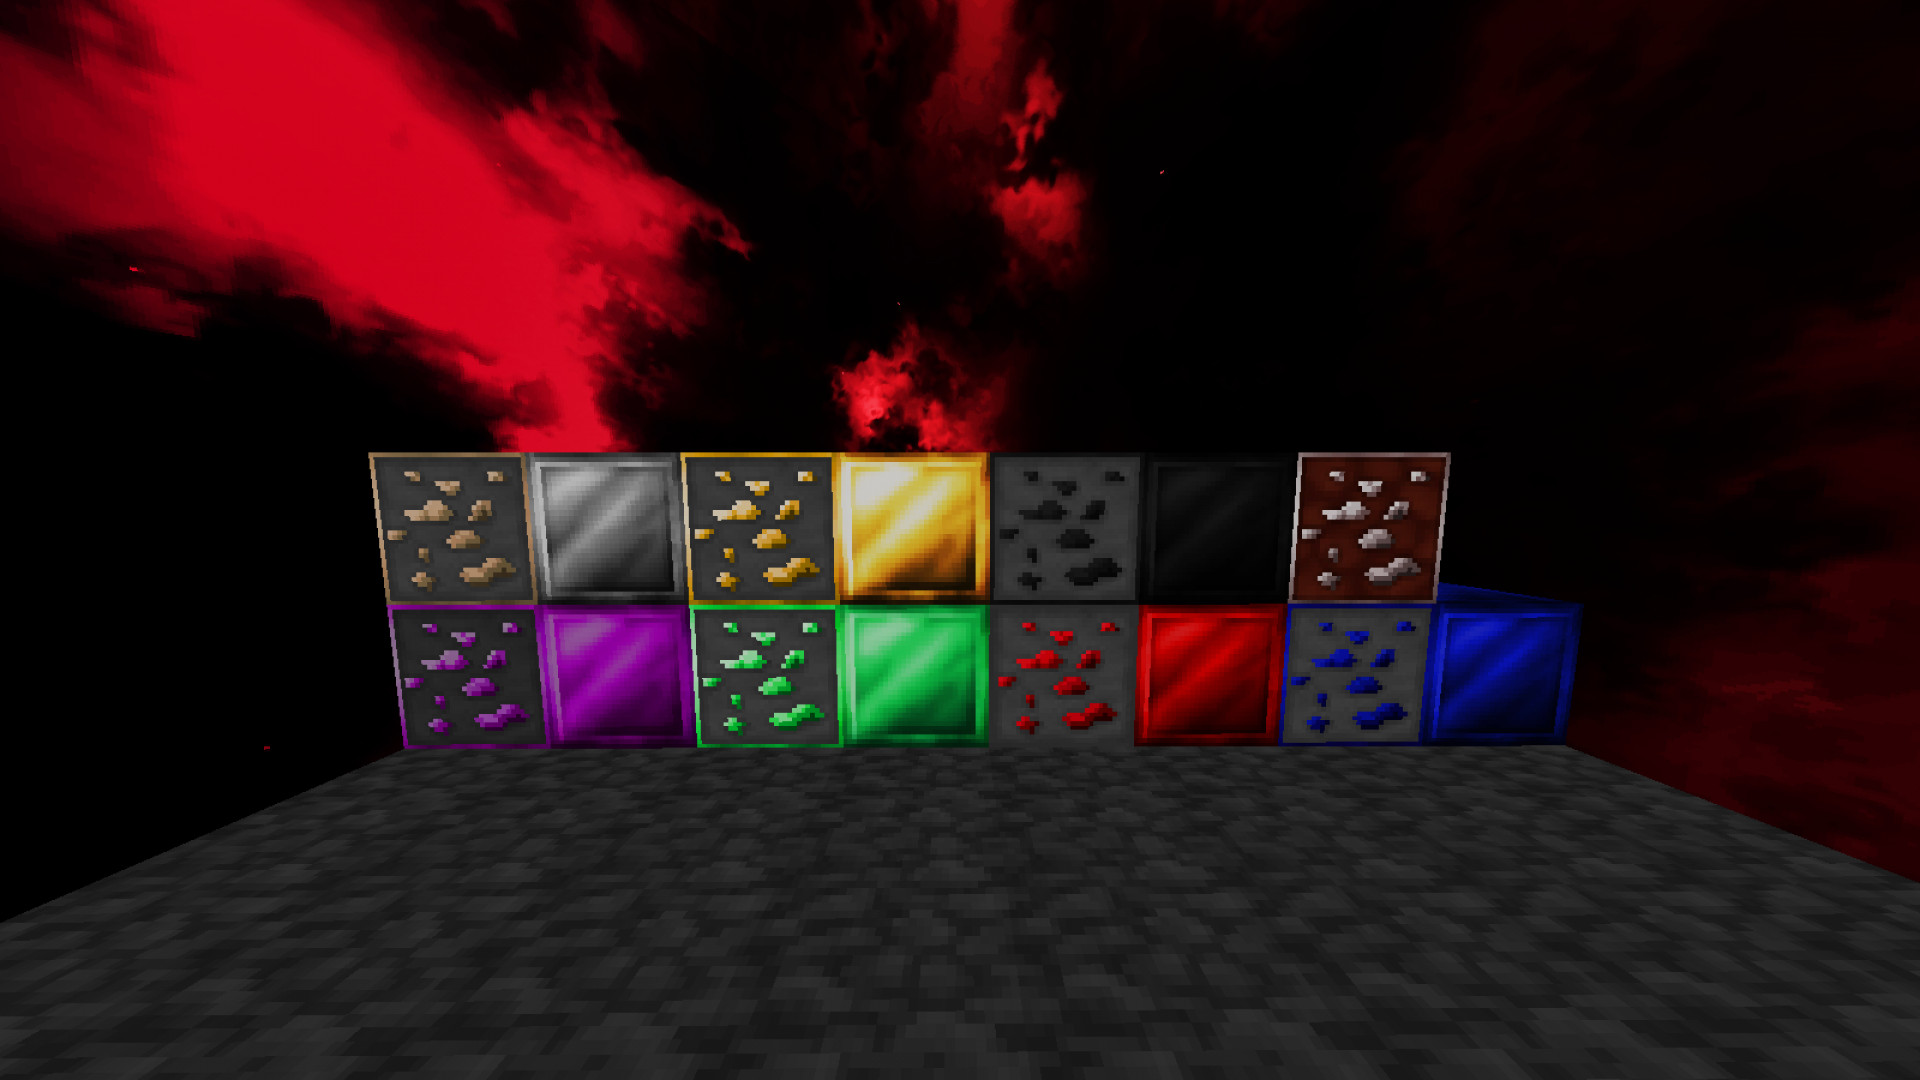 minecraft 1.12.2 anime texture pack mobs